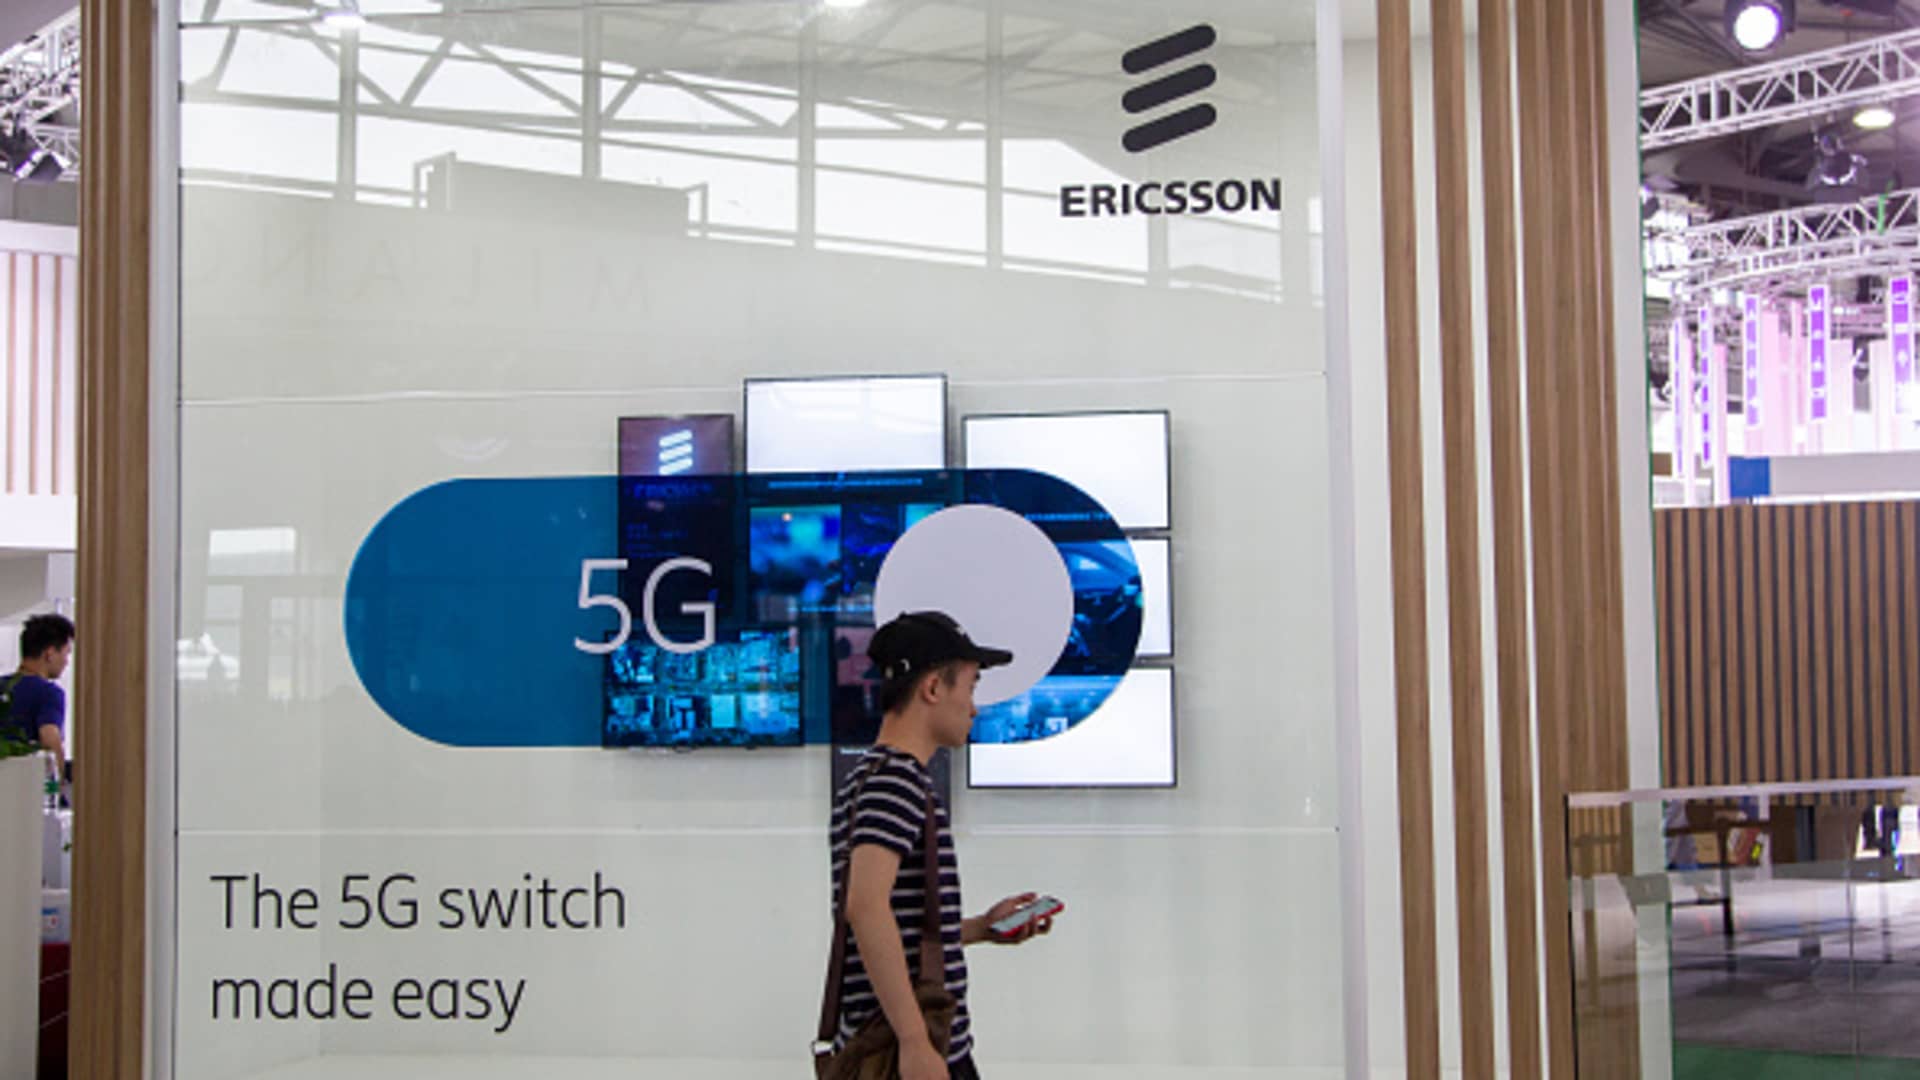 People visit the Ericsson stand during the Mobile World Congress (MWC) Shanghai 2019 at the Shanghai New International Expo Center on June 25, 2019 in Shanghai, China.